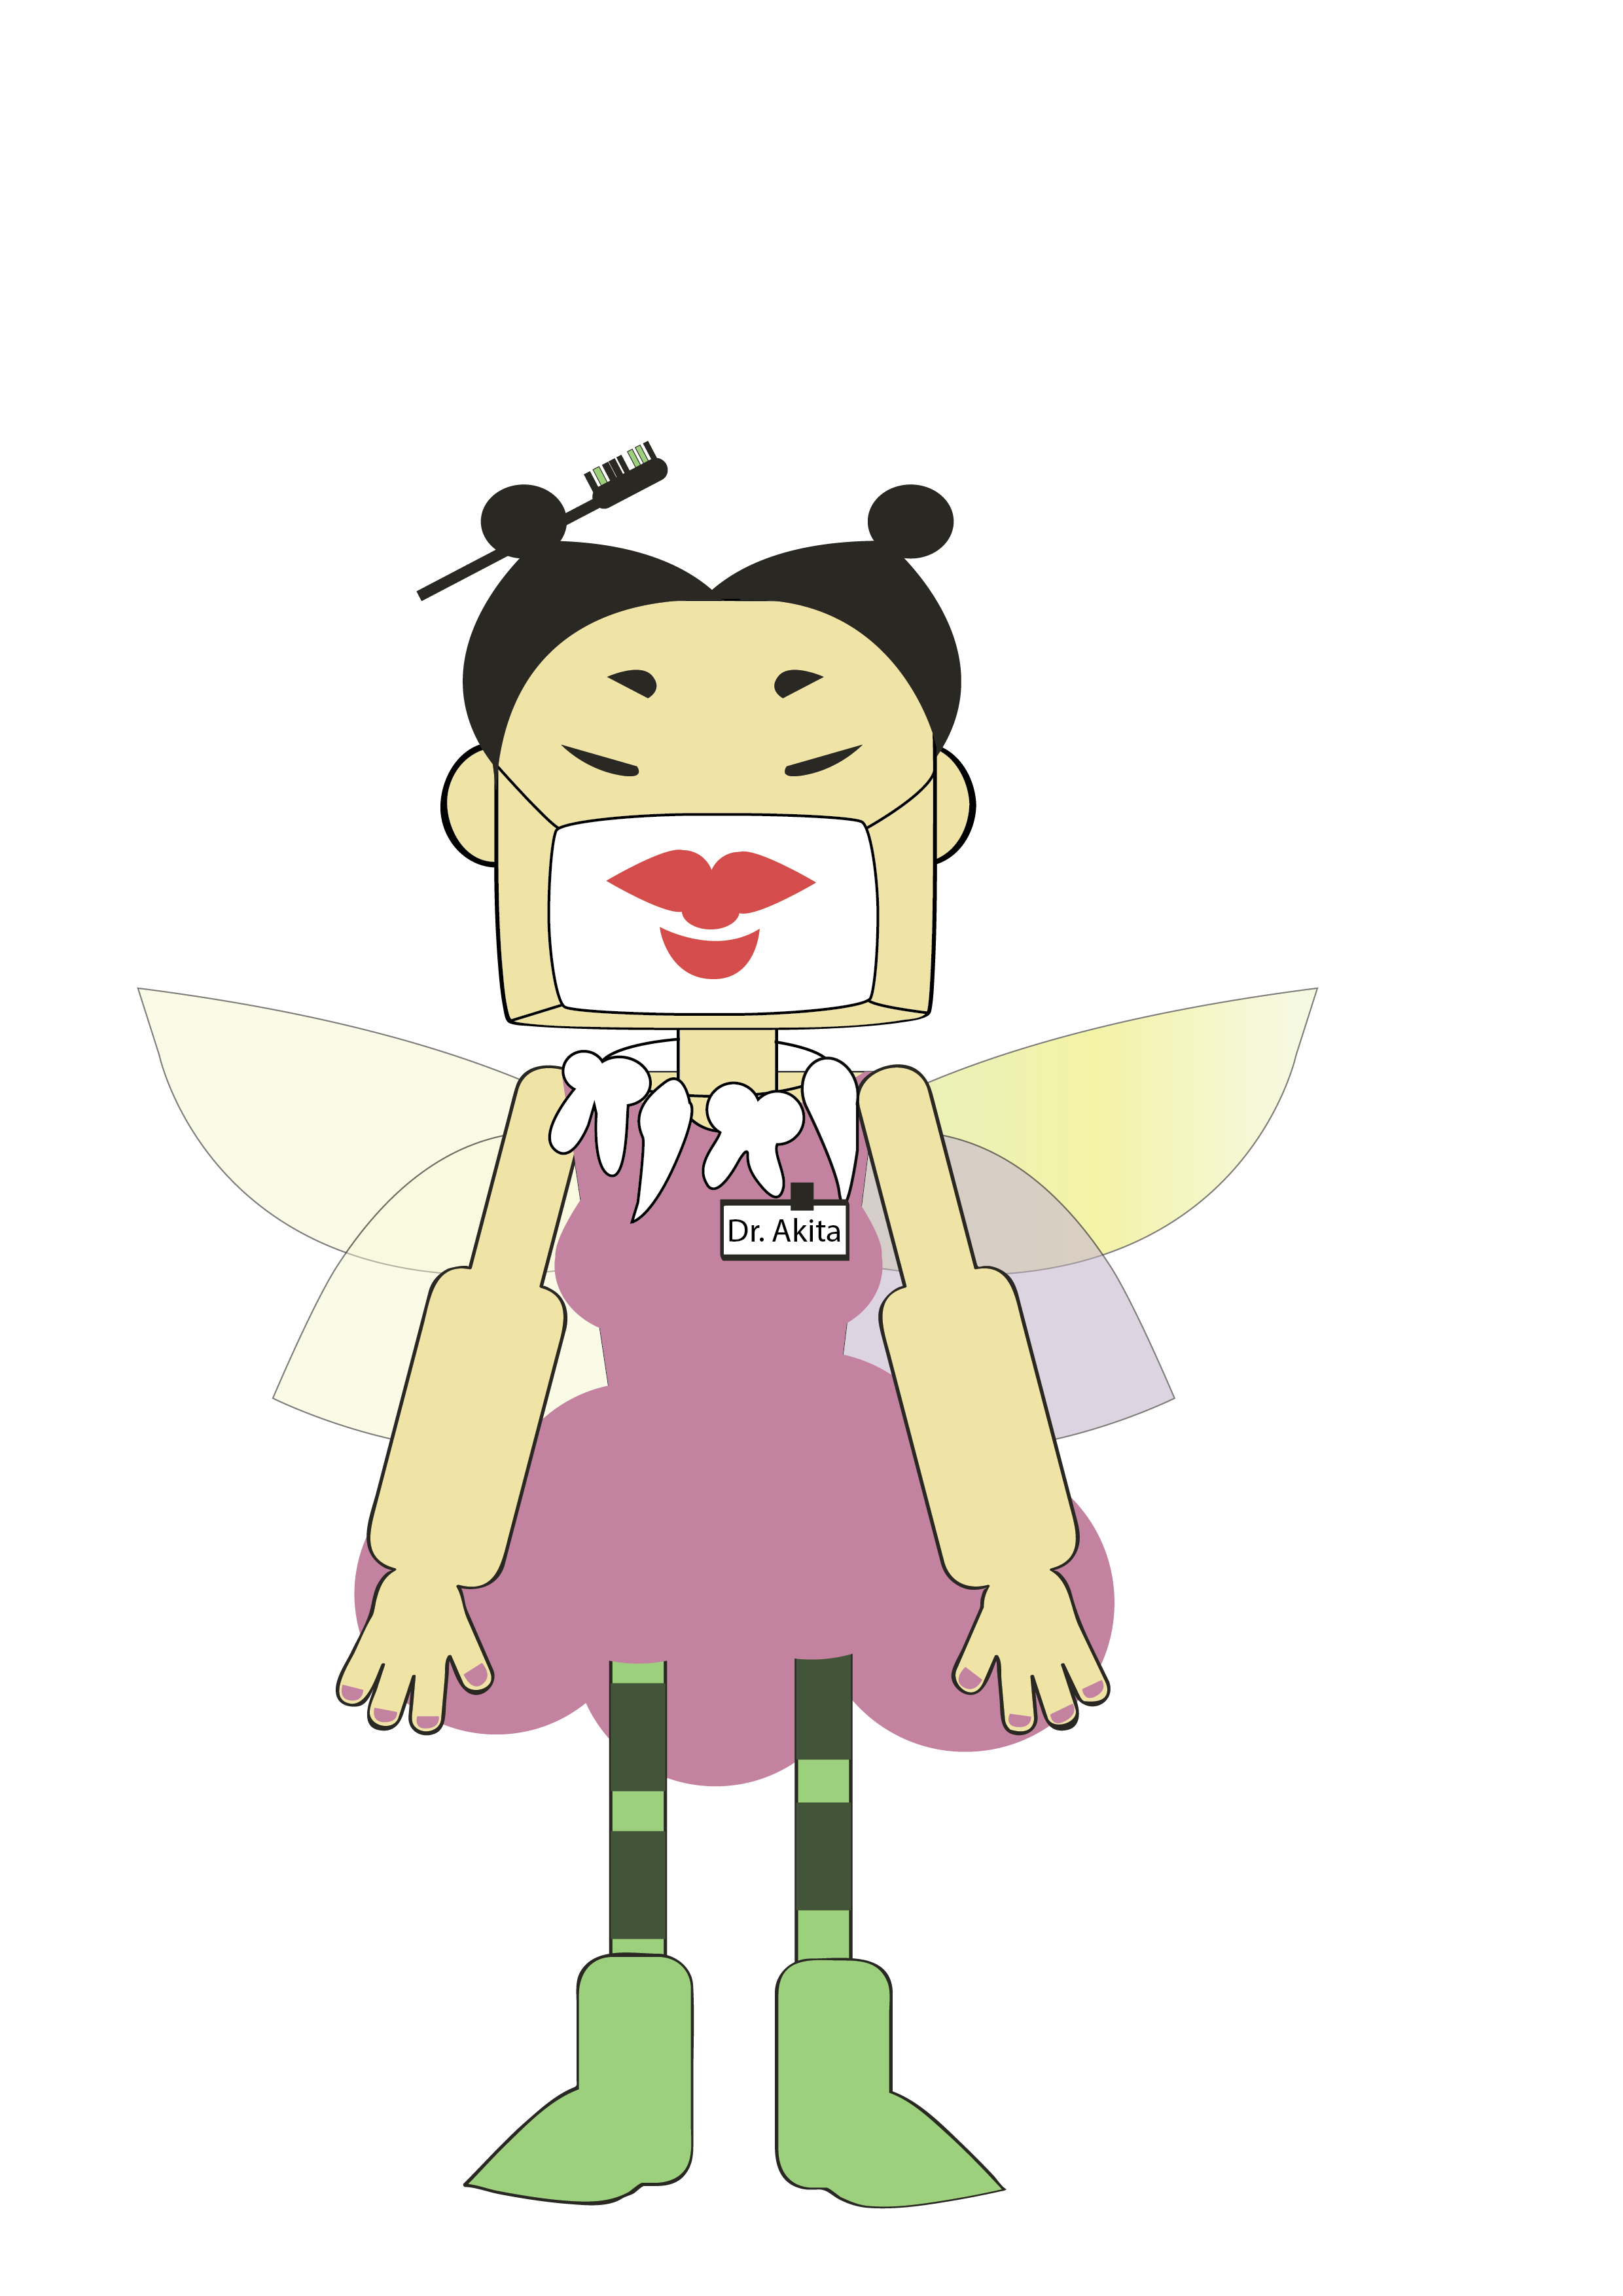 Tooth fairy character design. Dentist clipart mask